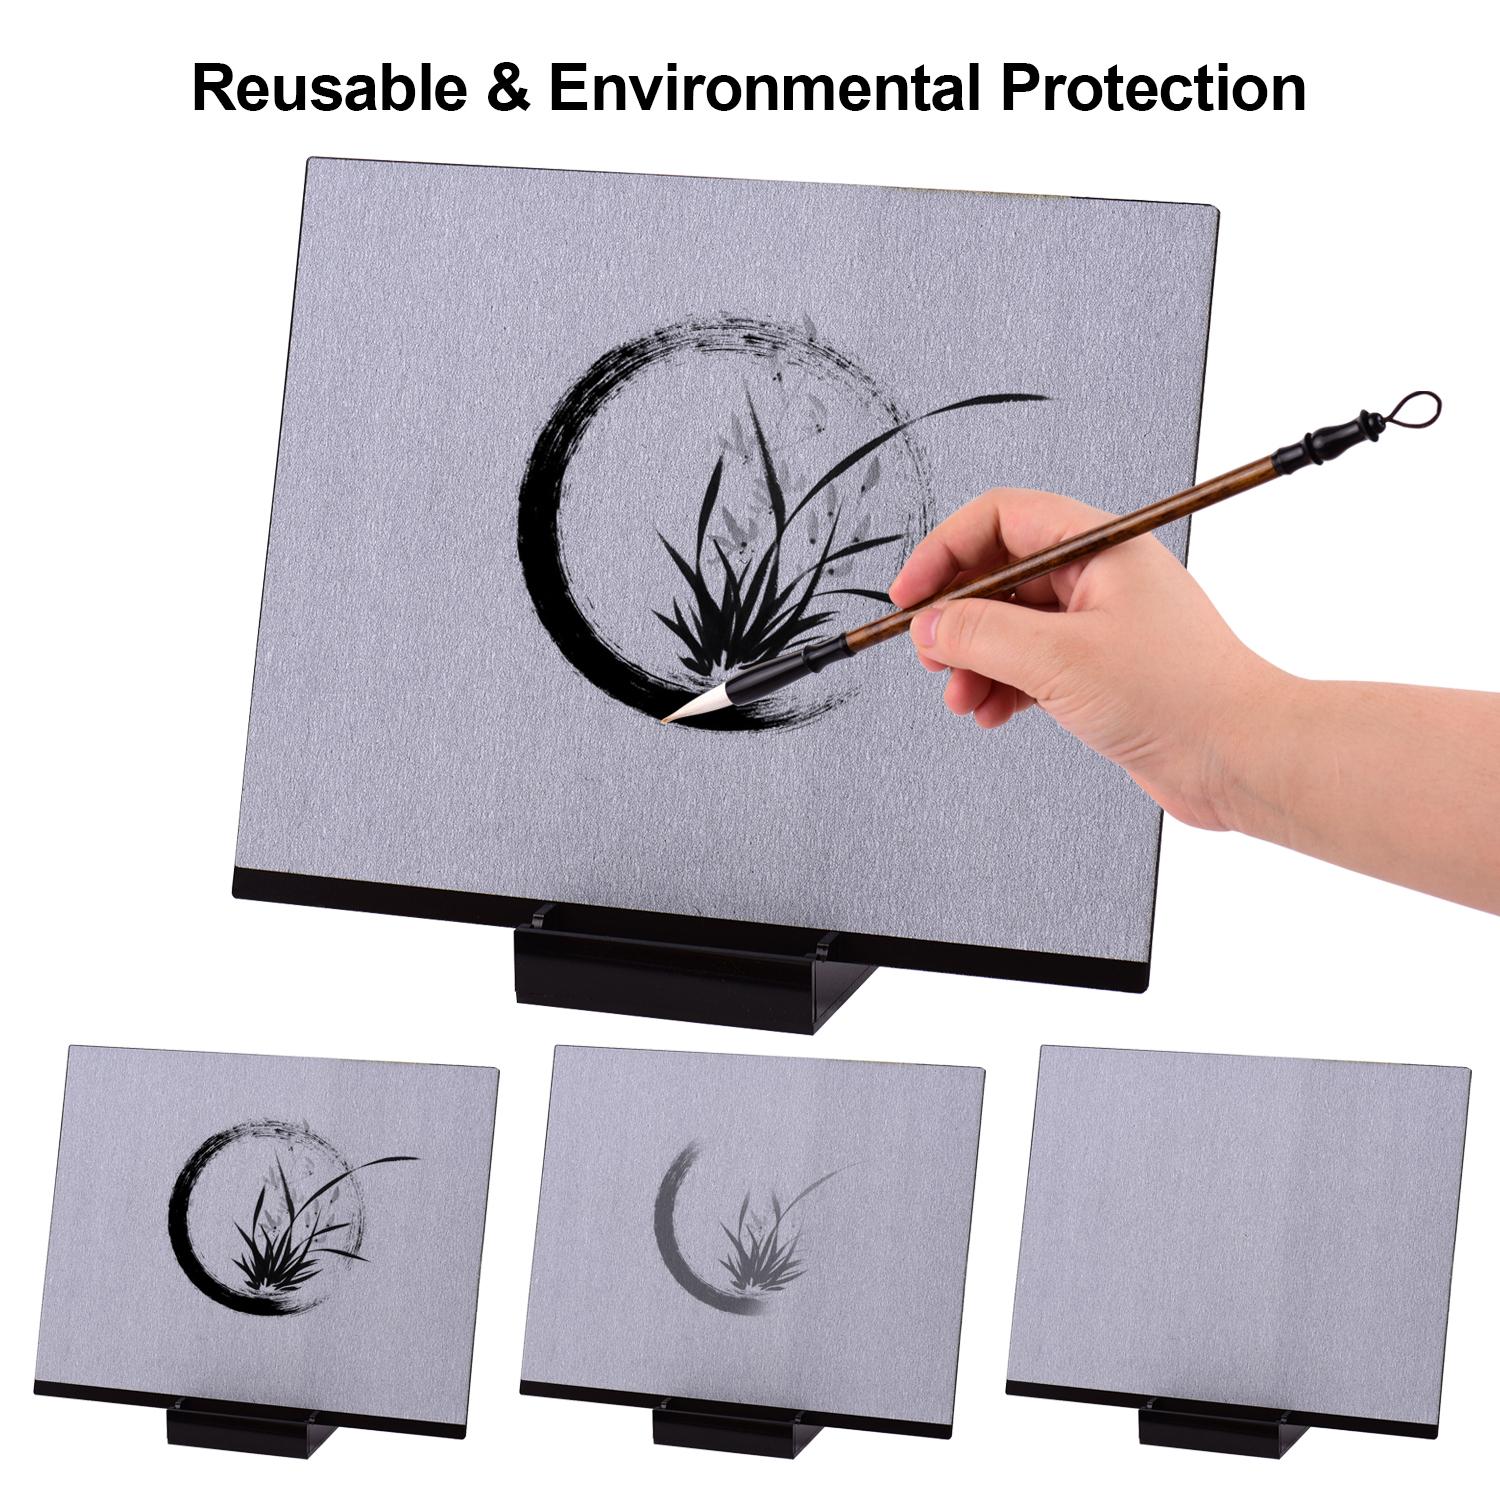 Reusable Buddha Board Artist Board Paint with Water Brush & Stand Release Pressure Relaxation Meditation Art, Size: 37.5 x 30cm Board, Black